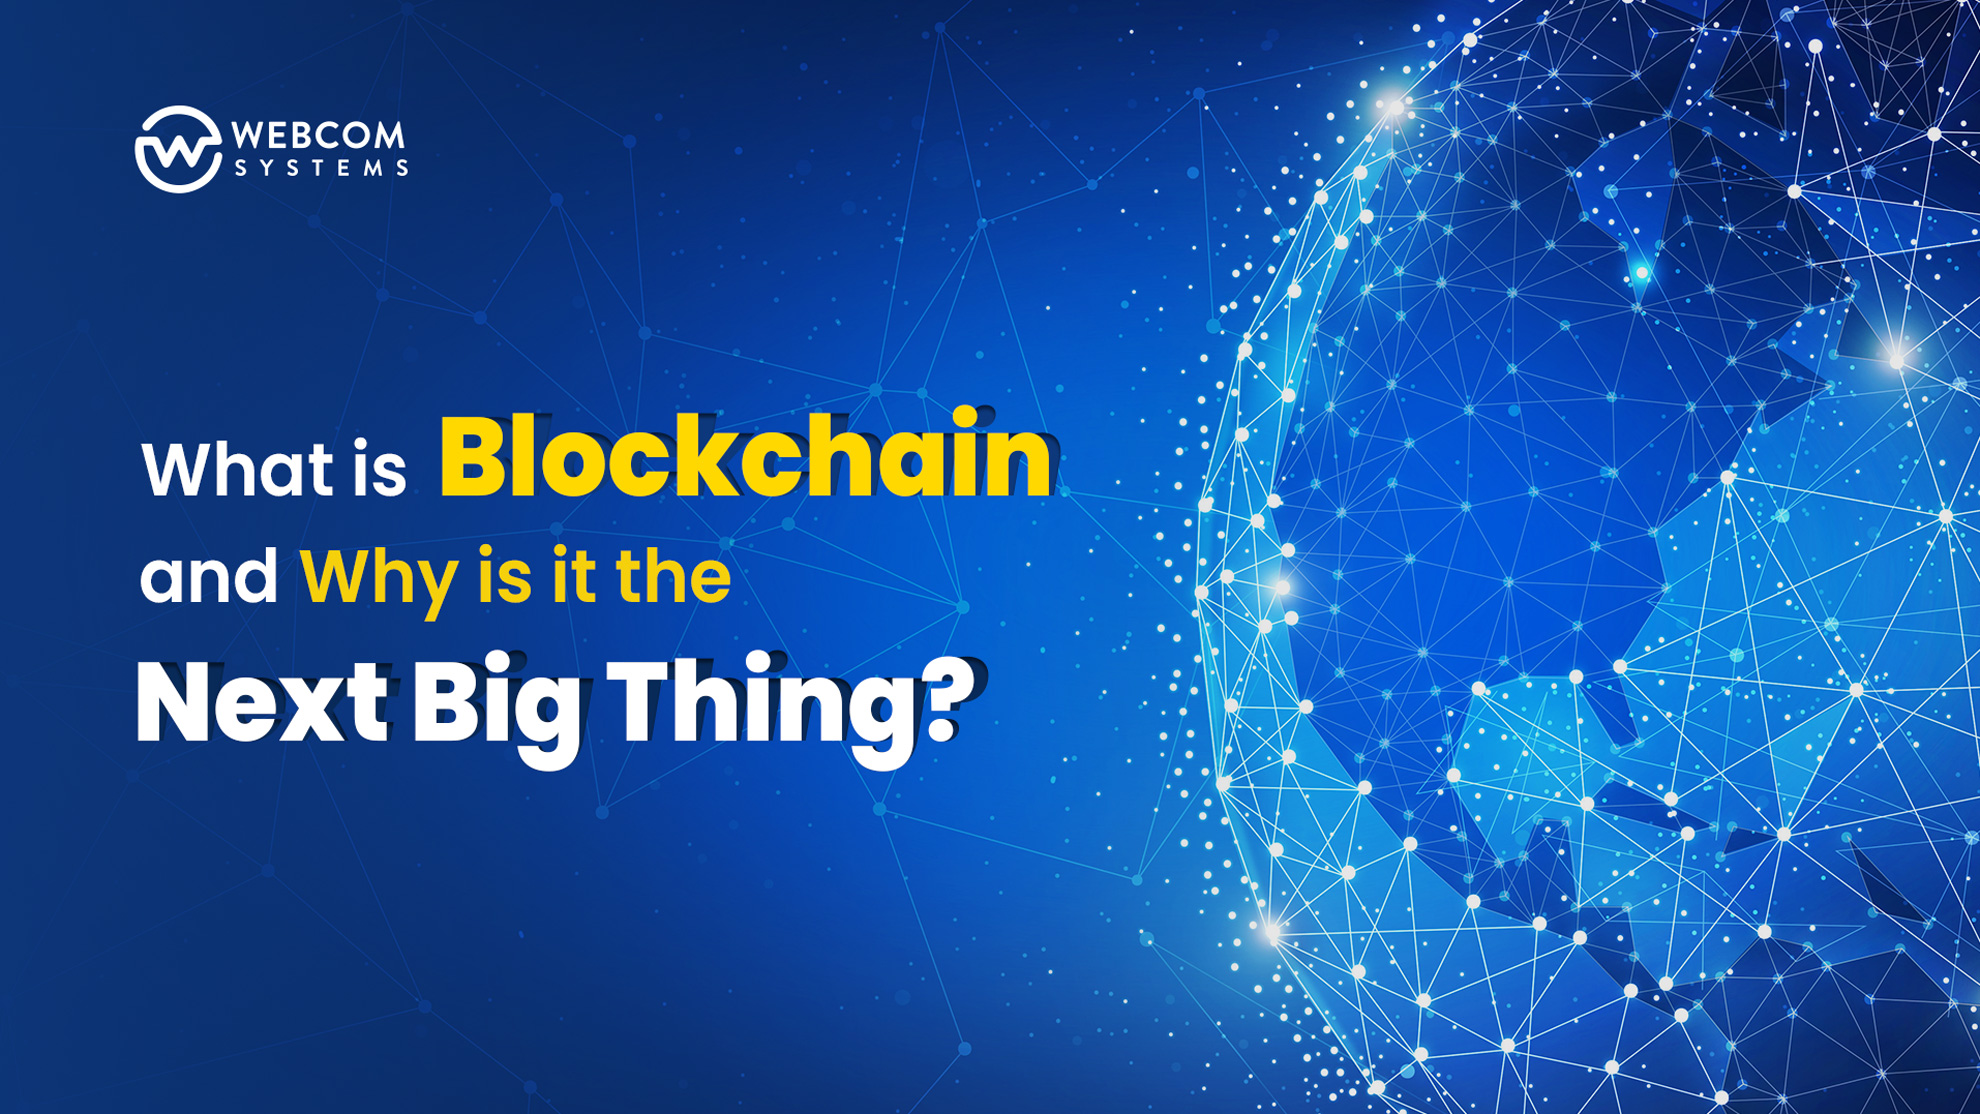 What is Blockchain and Why is it the Next Big Thing?